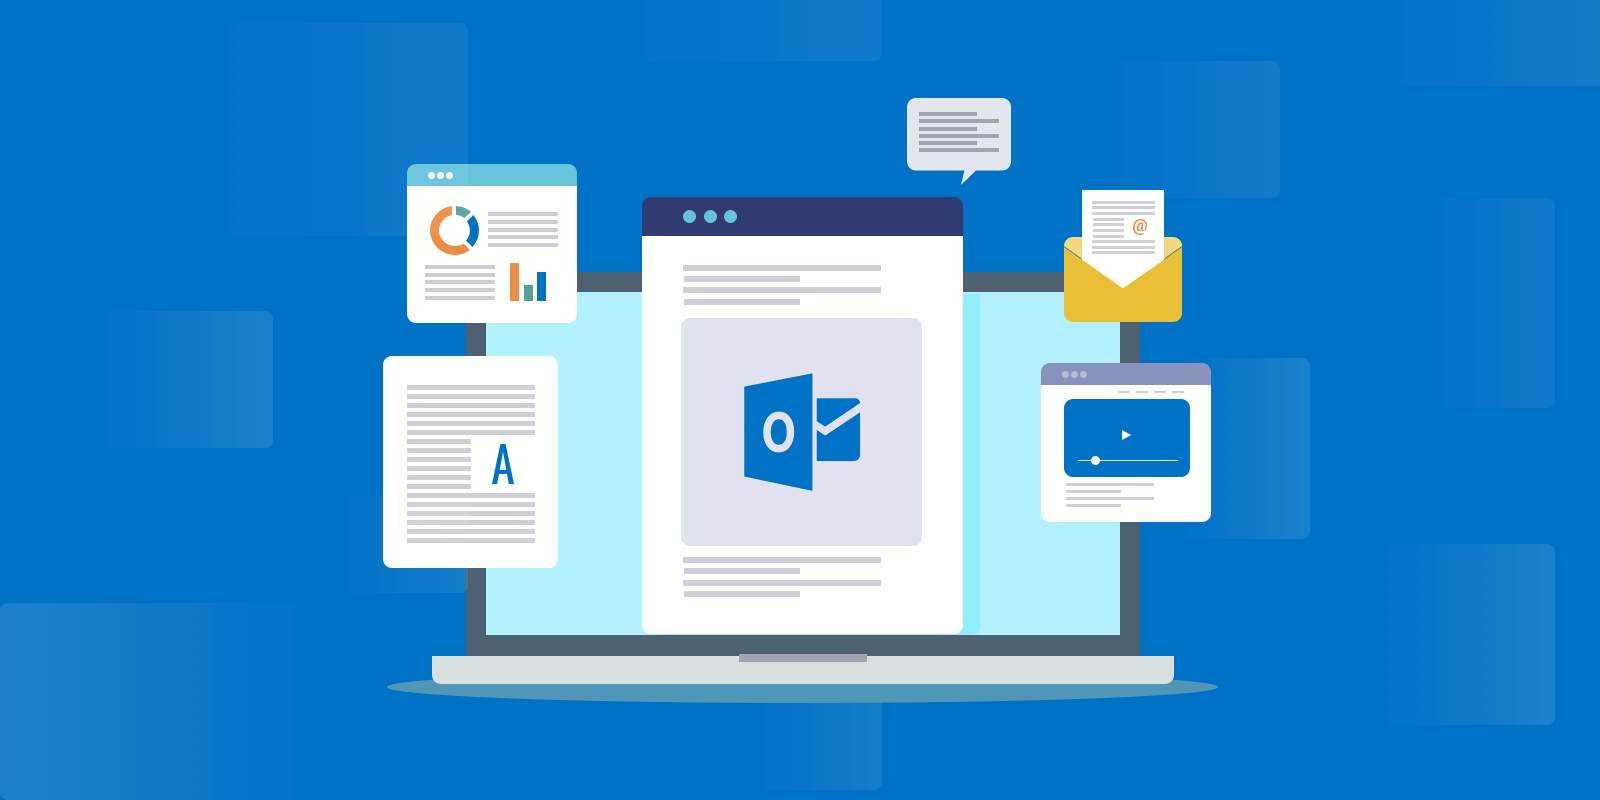 How To Send HTML Emails In Outlook